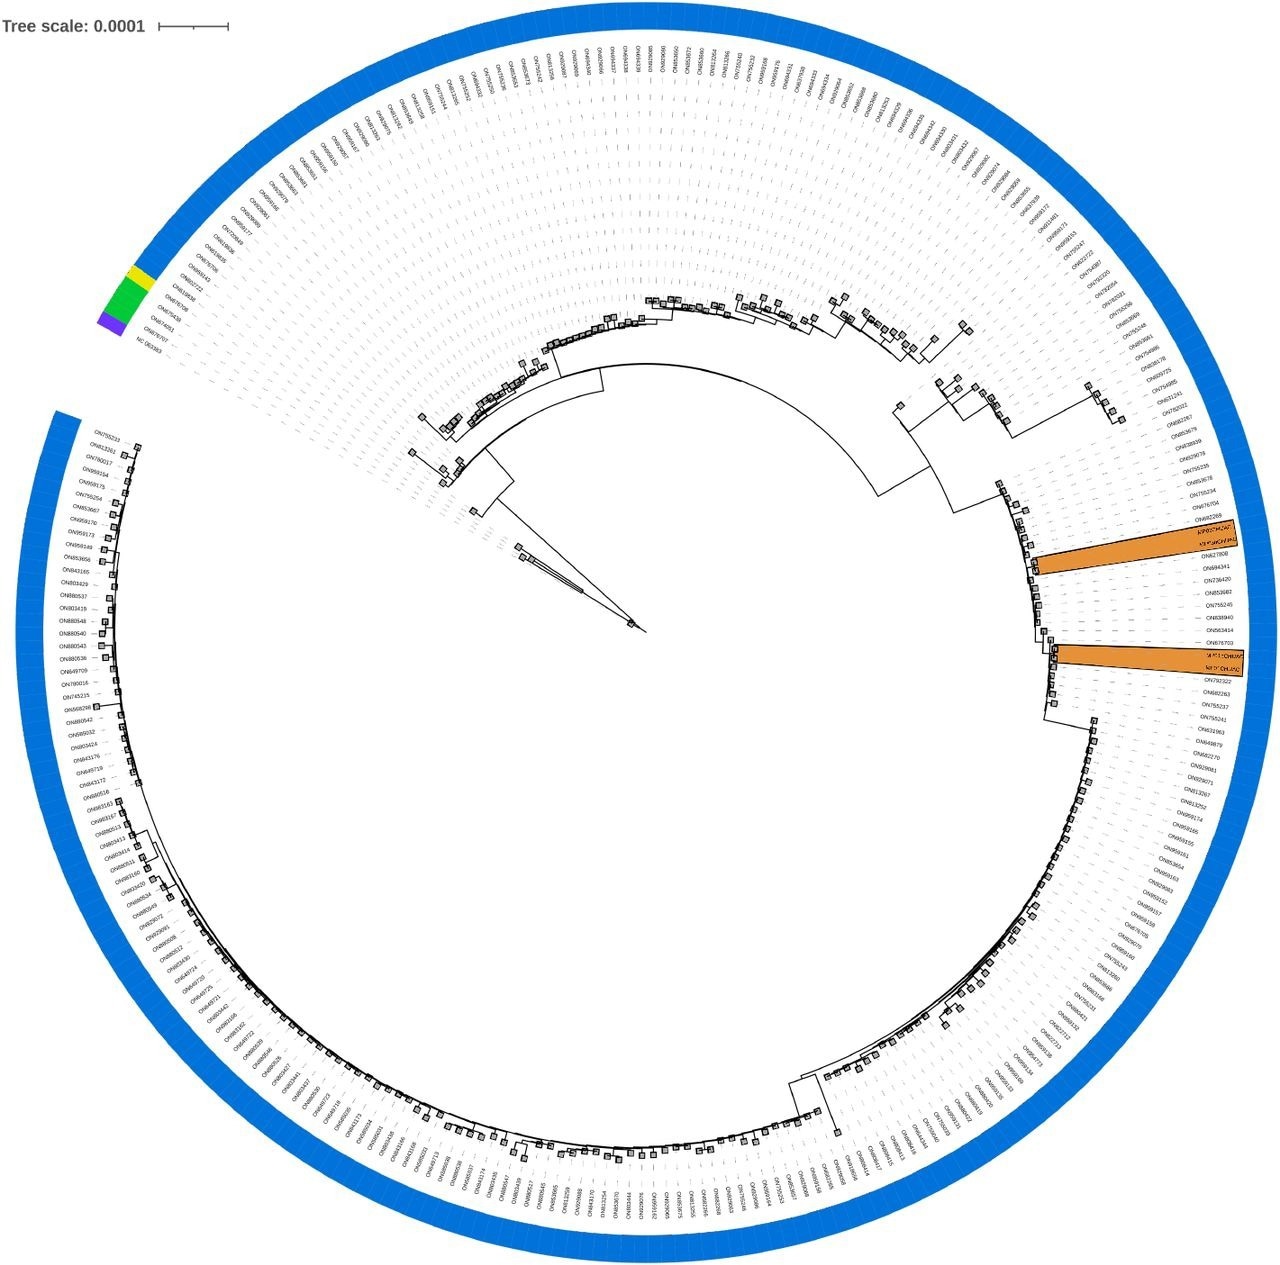 Phylogenomic tree. Phylogenomic analysis of the present study’s samples, comparing them to all complete MPXV genomes available in GenBank to date (2022-07-18, 275 genomes from taxid 10244). This does not pretend to infer the evolution of the virus, only to locate the most similar entries to the samples in this study. A color strip indicates each sample’s lineage (A: purple, A.1.1: yellow, A.2: green, B.1: blue), and orange areas highlight the study’s samples.